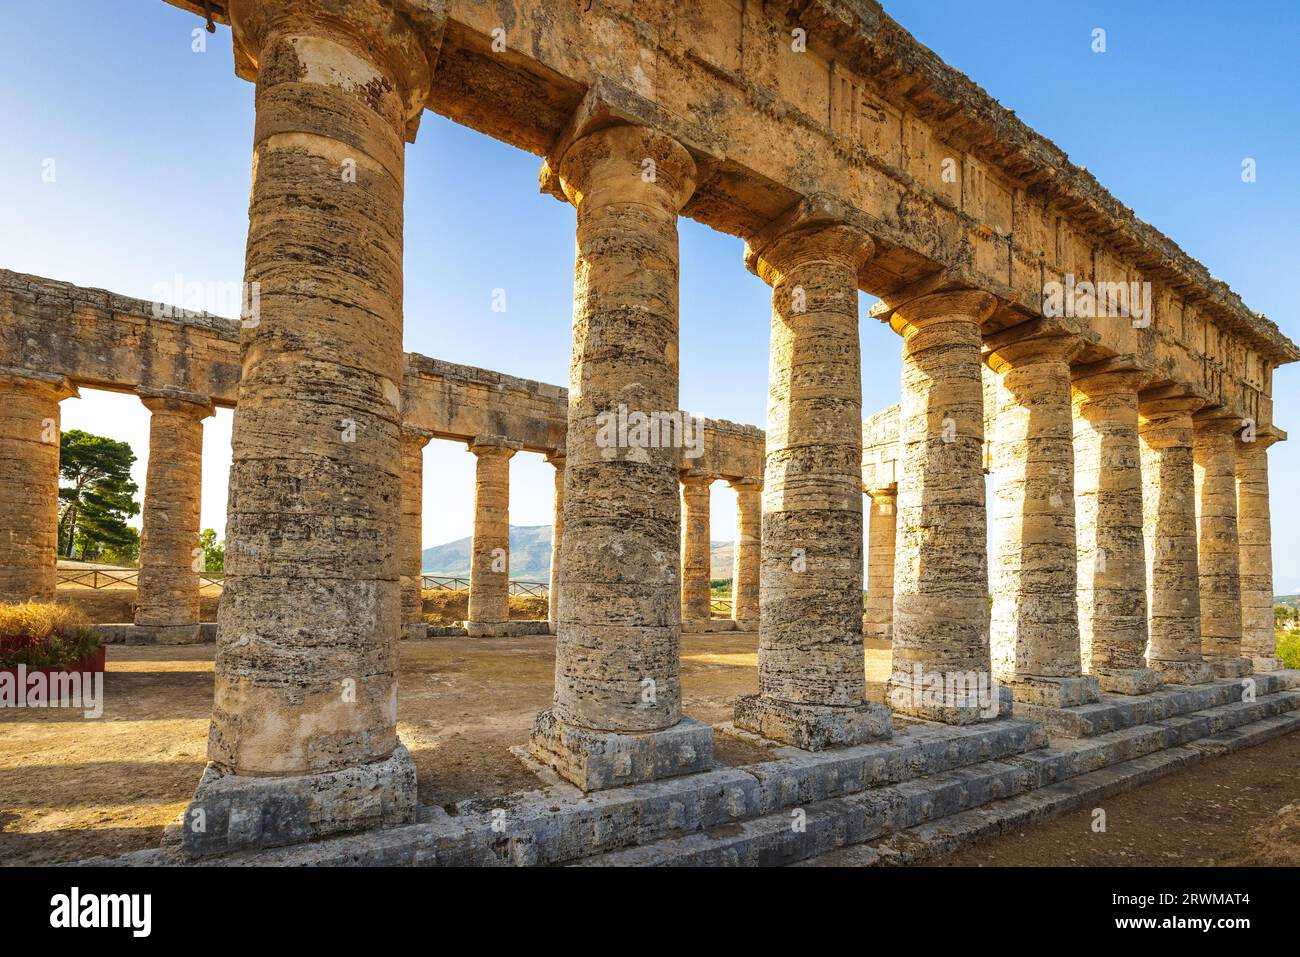 The Doric temple of Segesta. The archaeological site at Sicily, Italy, Europe. Stock Photo